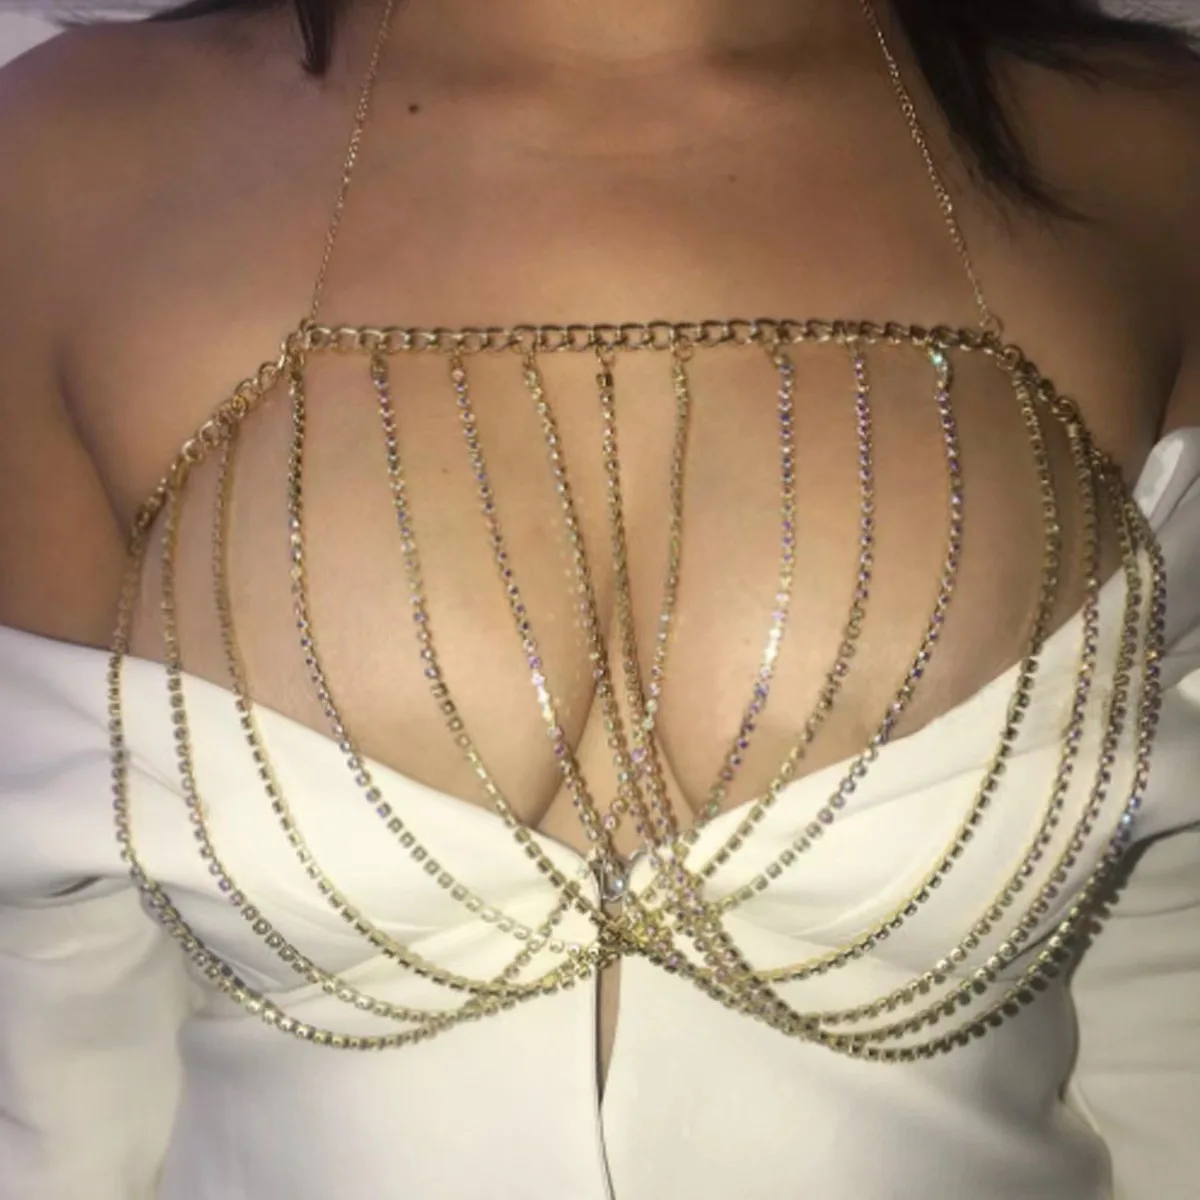 

Women's Body Chain Necklace Accessory Shine Sexy Swimsuit Bathing Sequined Cross Row Chain Belly Female Fashion Shoulder Jewelry